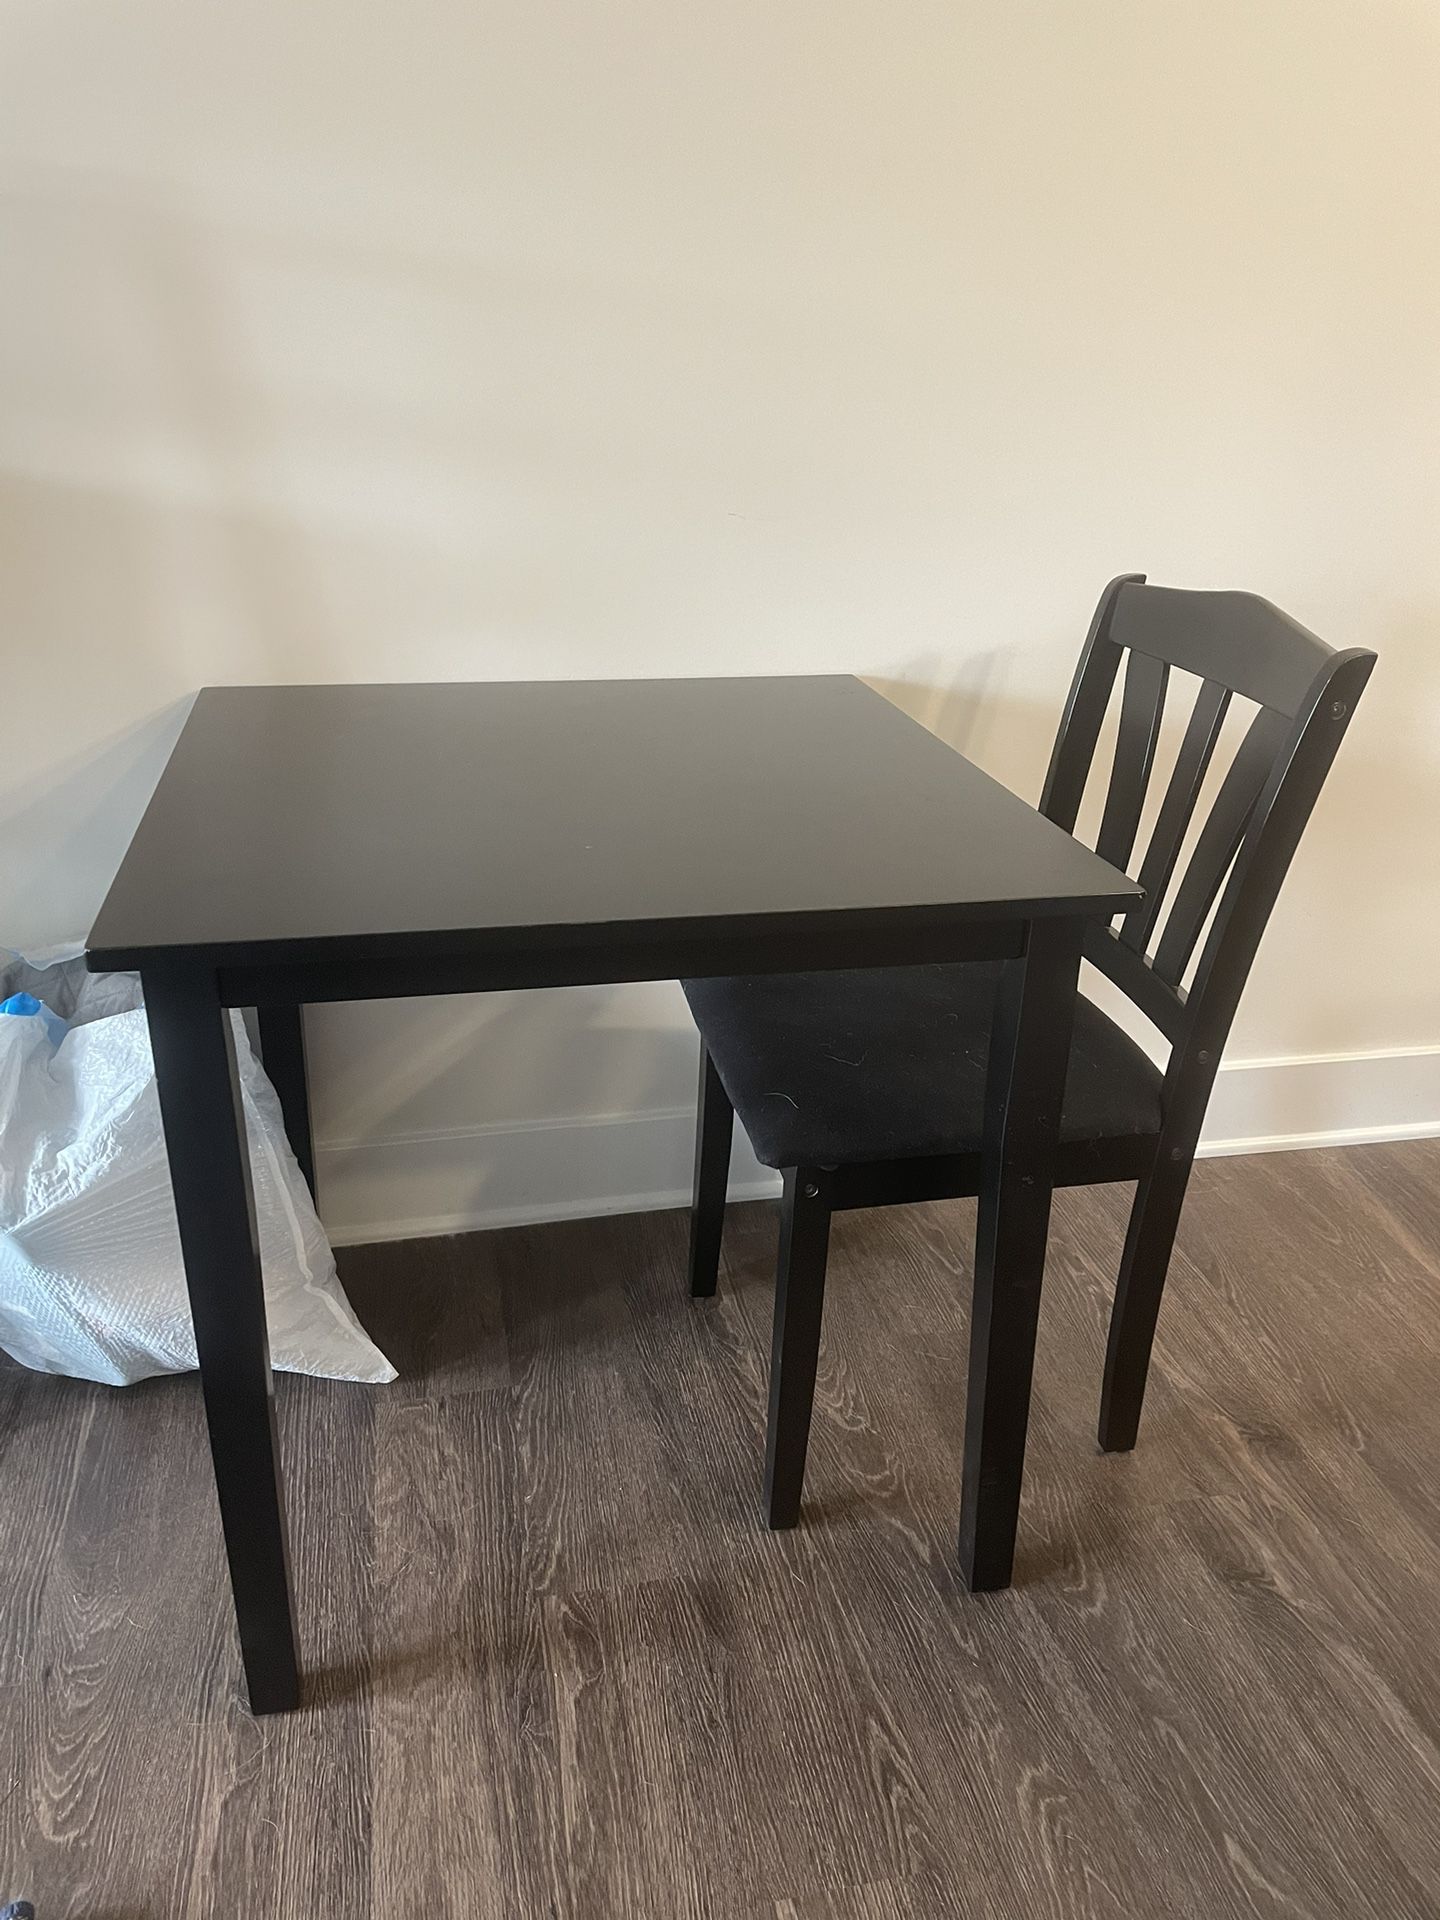 Black Dining Table And 2 Chairs